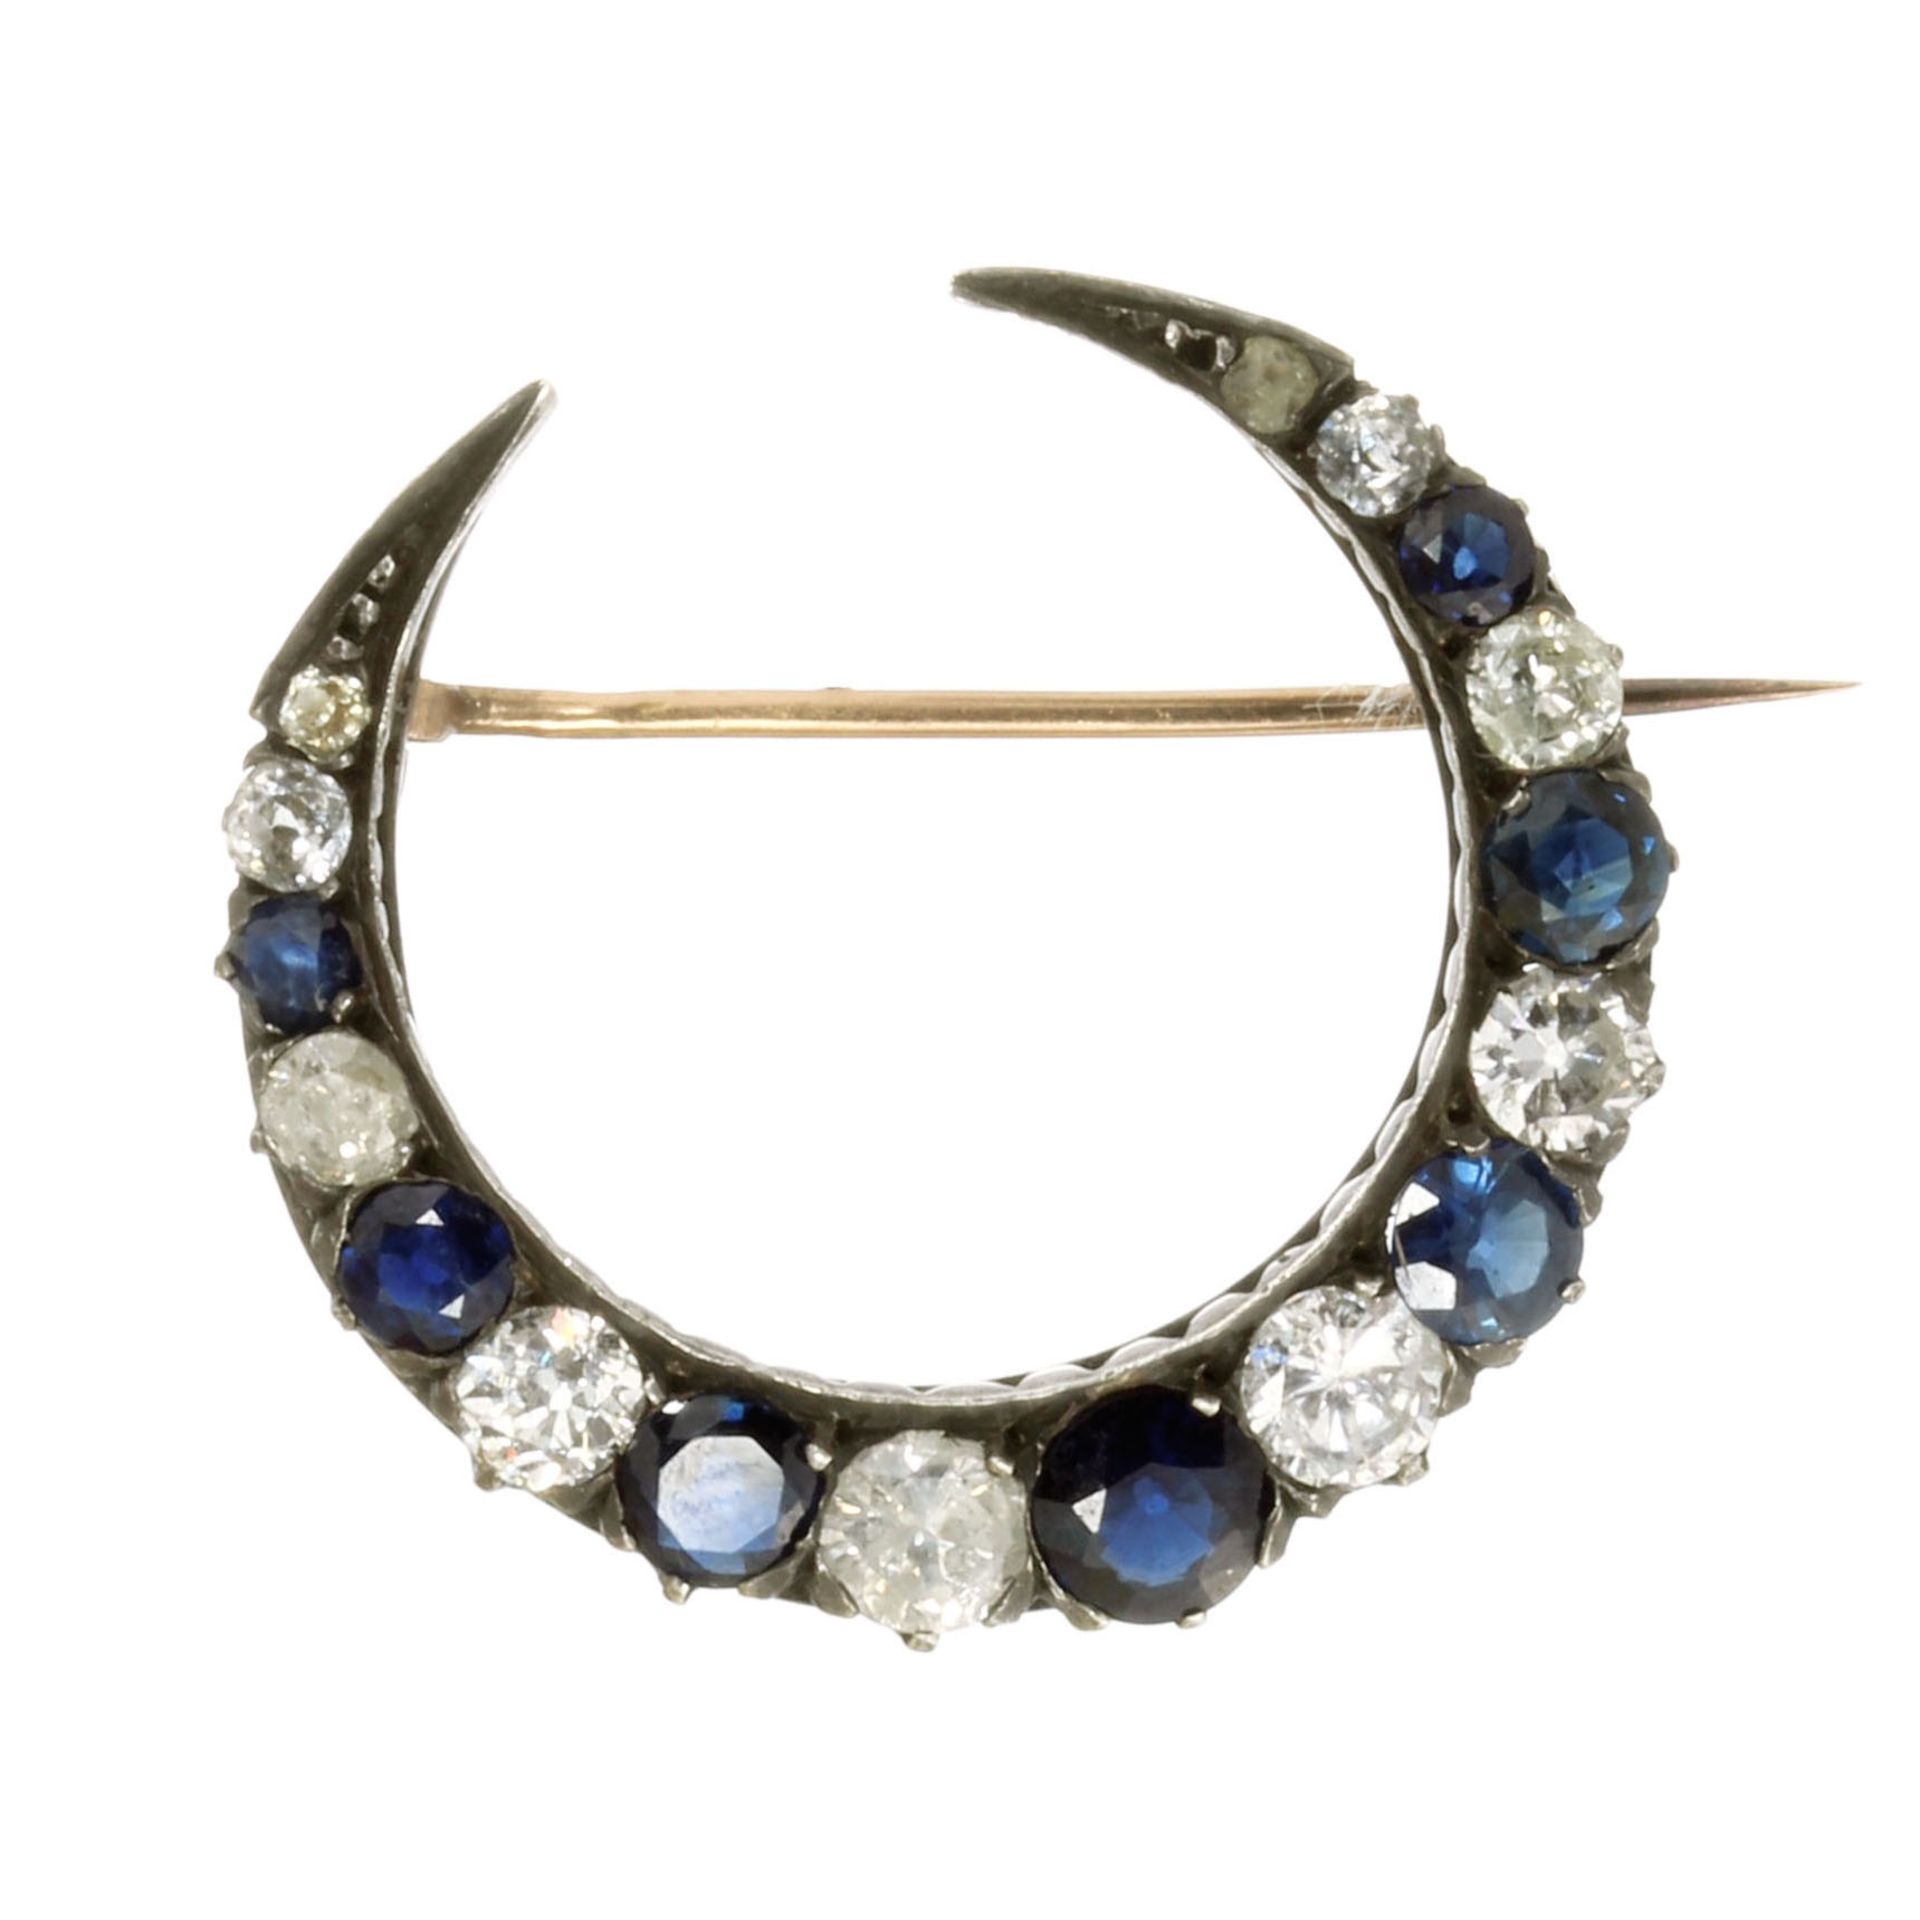 AN ANTIQUE BLUE SAPPHIRE AND DIAMOND CRESCENT BROOCH in 18ct yellow gold and silver, designed as a